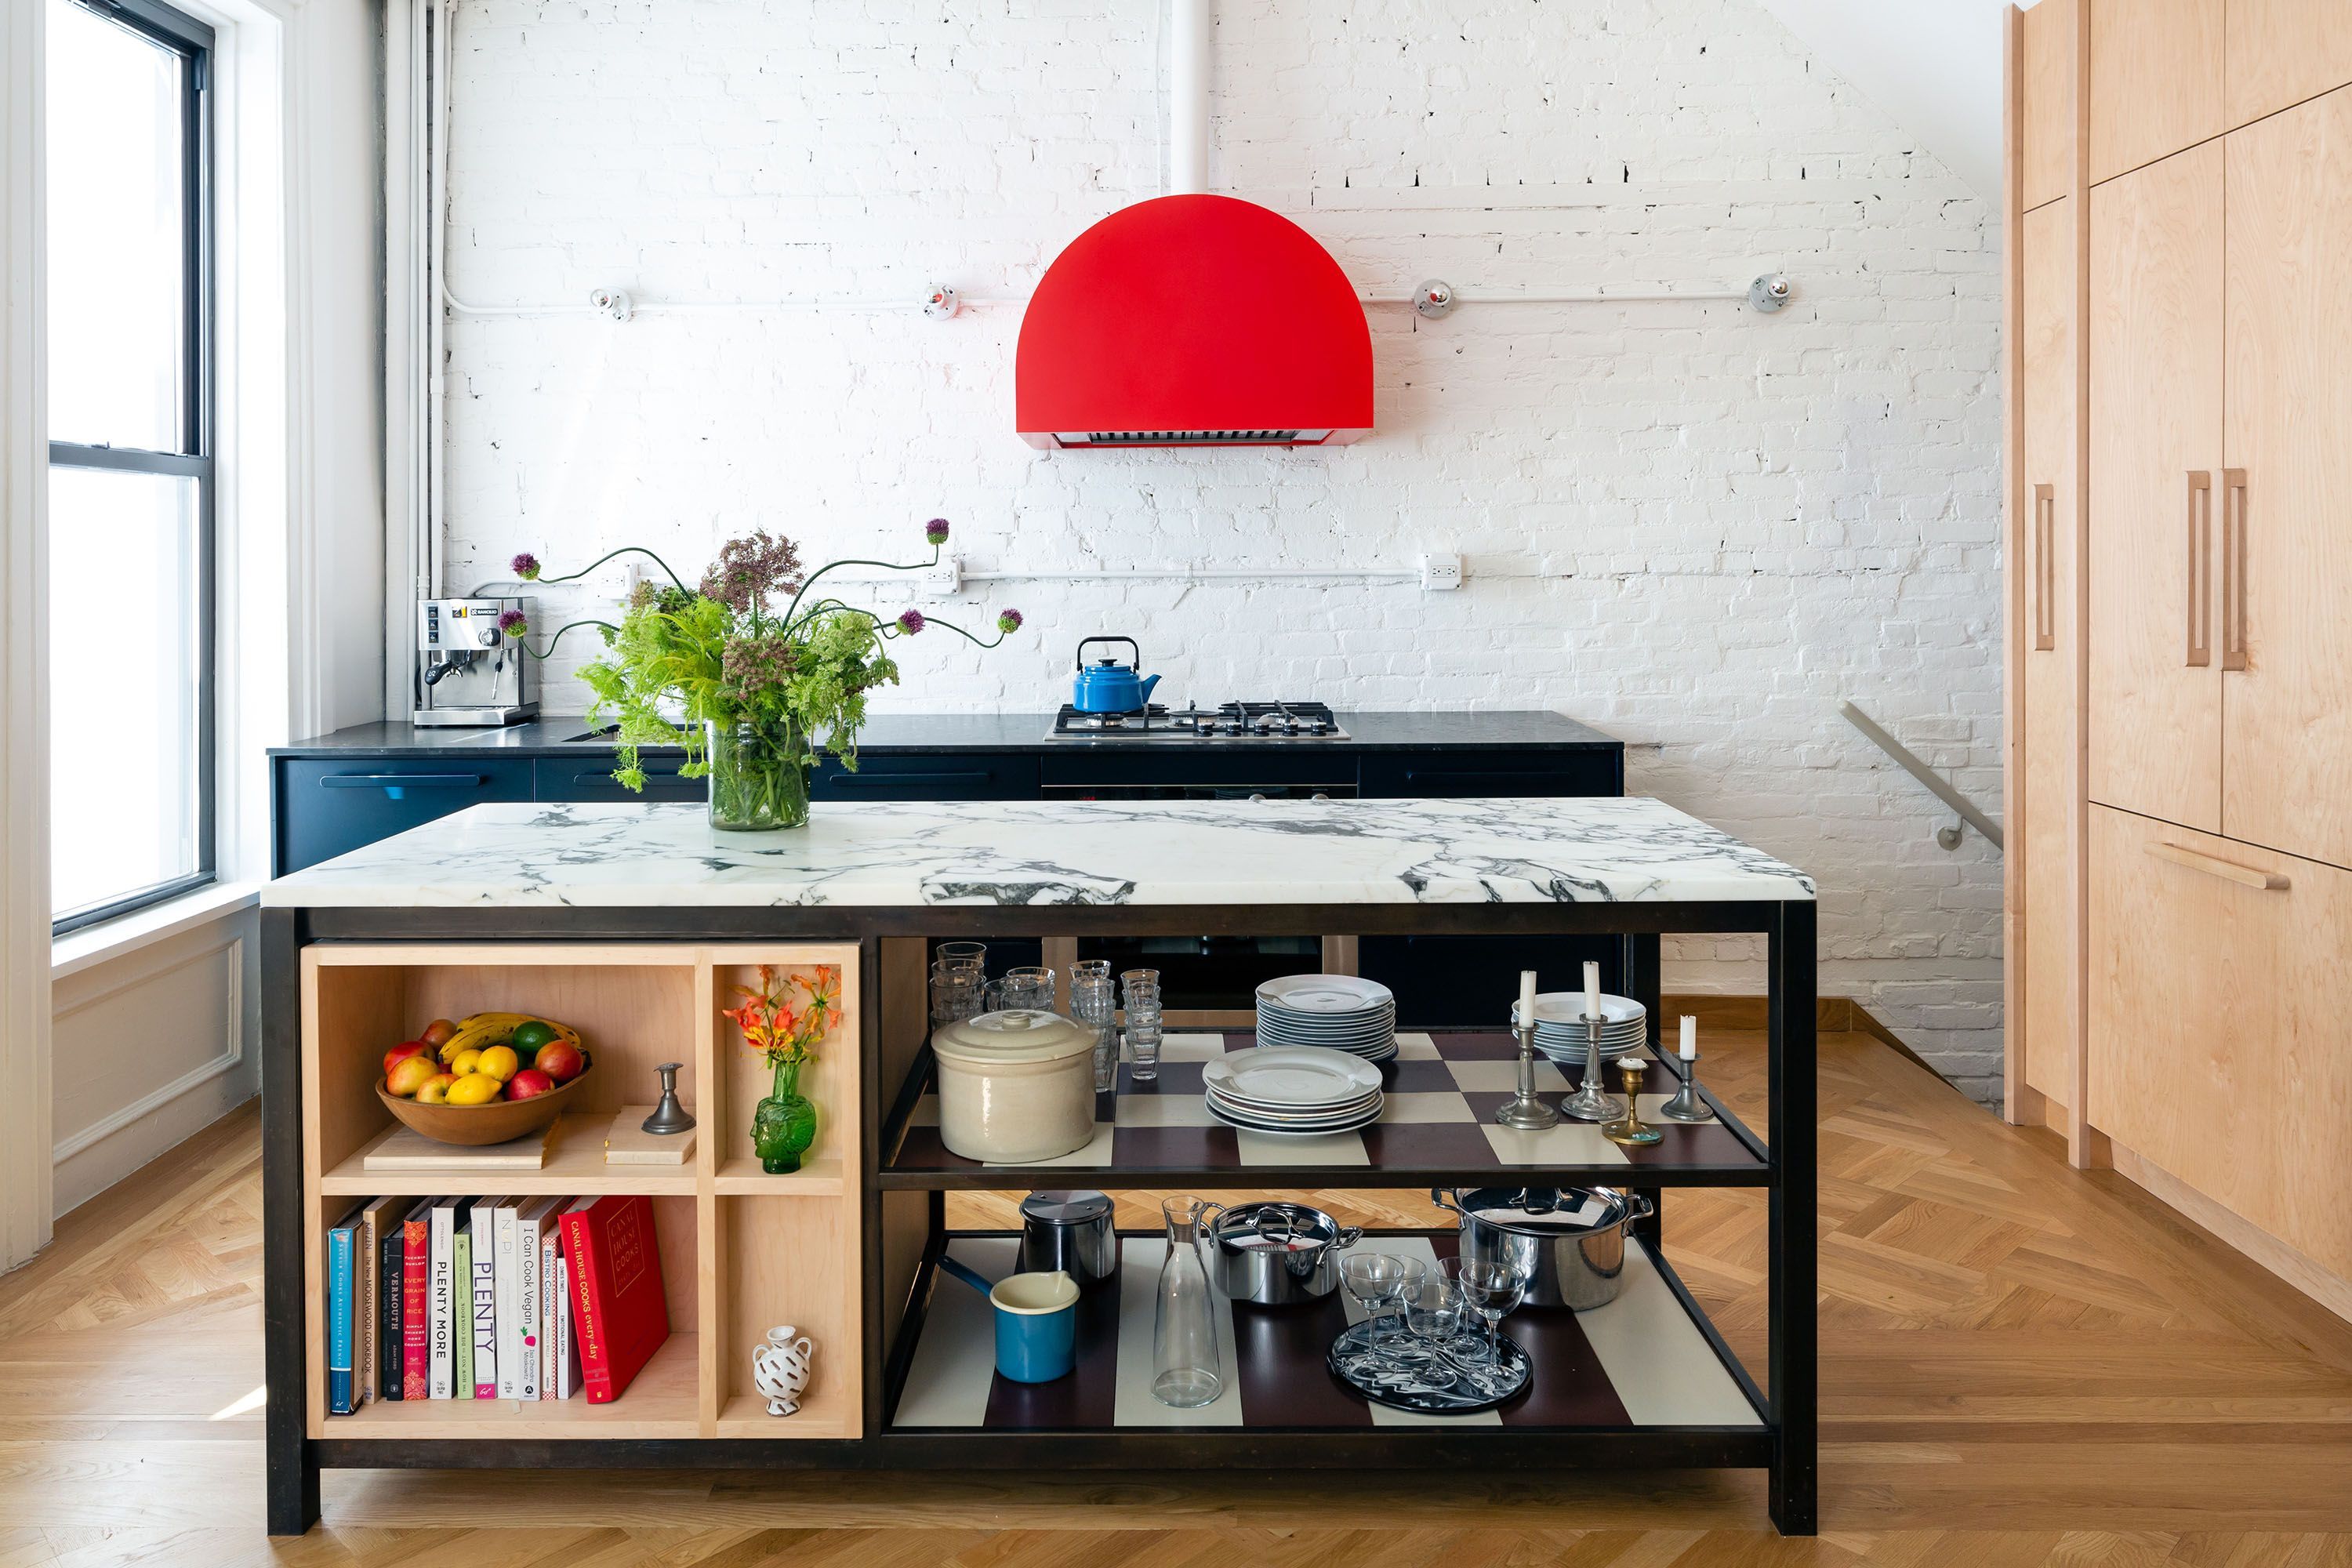 20+ Small Kitchen Ideas to Make the Most of Your Cooking Space